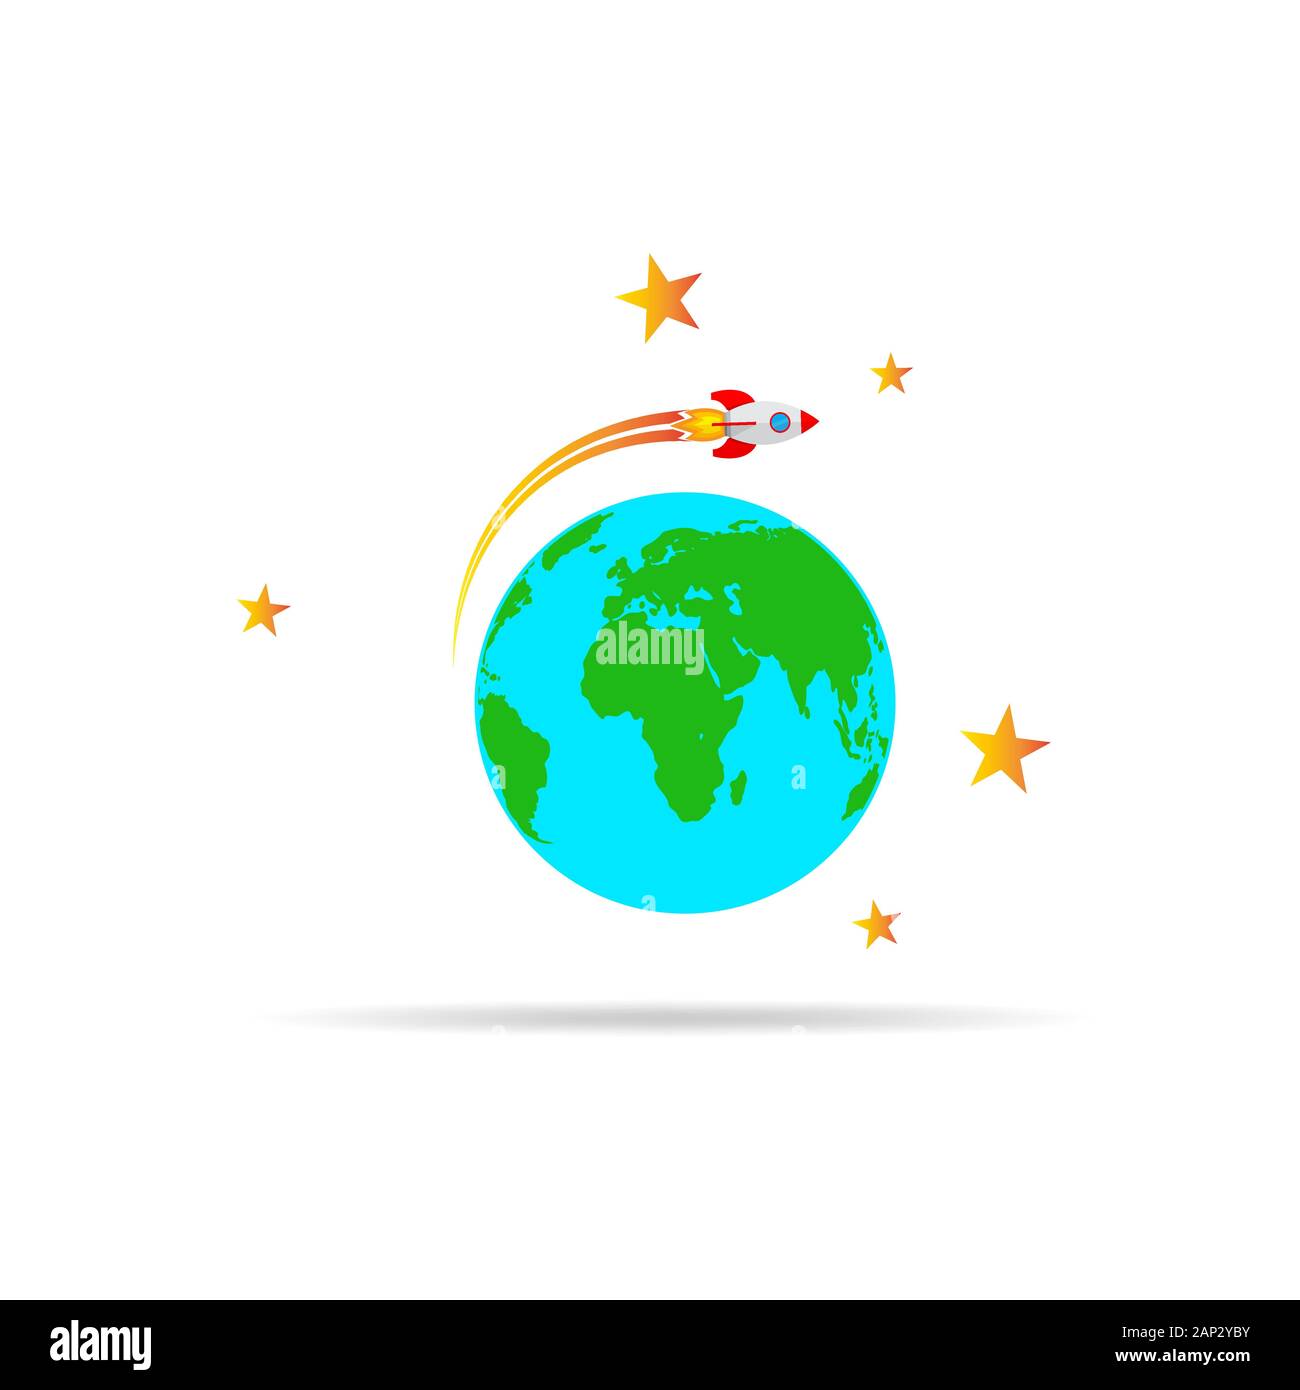 The spacecraft flies around the Earth. Colored space rocket with Globe Earth in flat design. Vector Illustration. Stock Vector